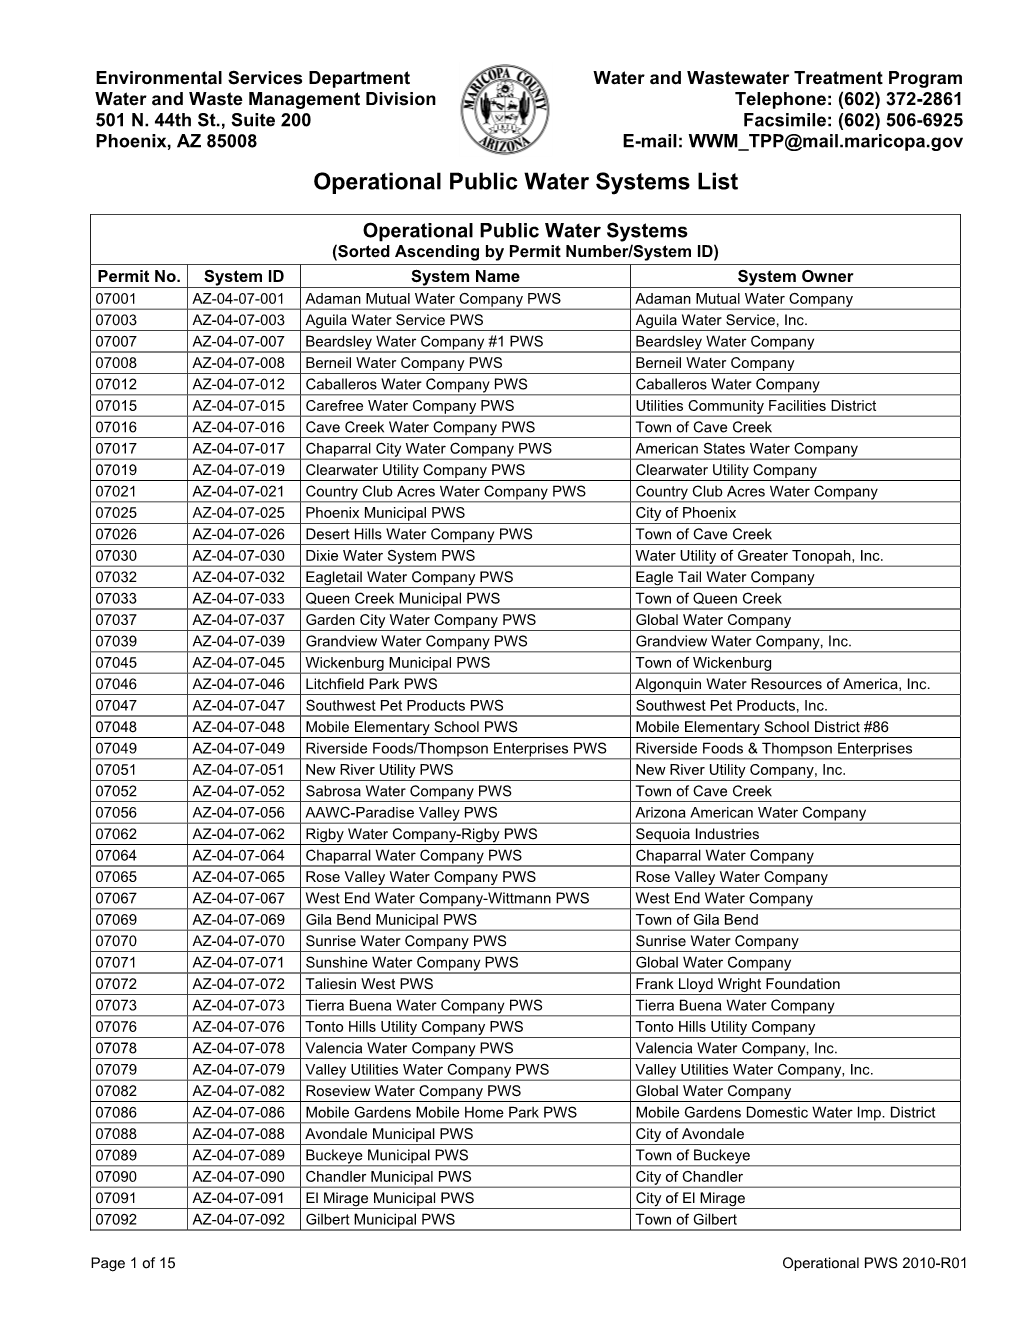 Operational Public Water Systems List (PDF)